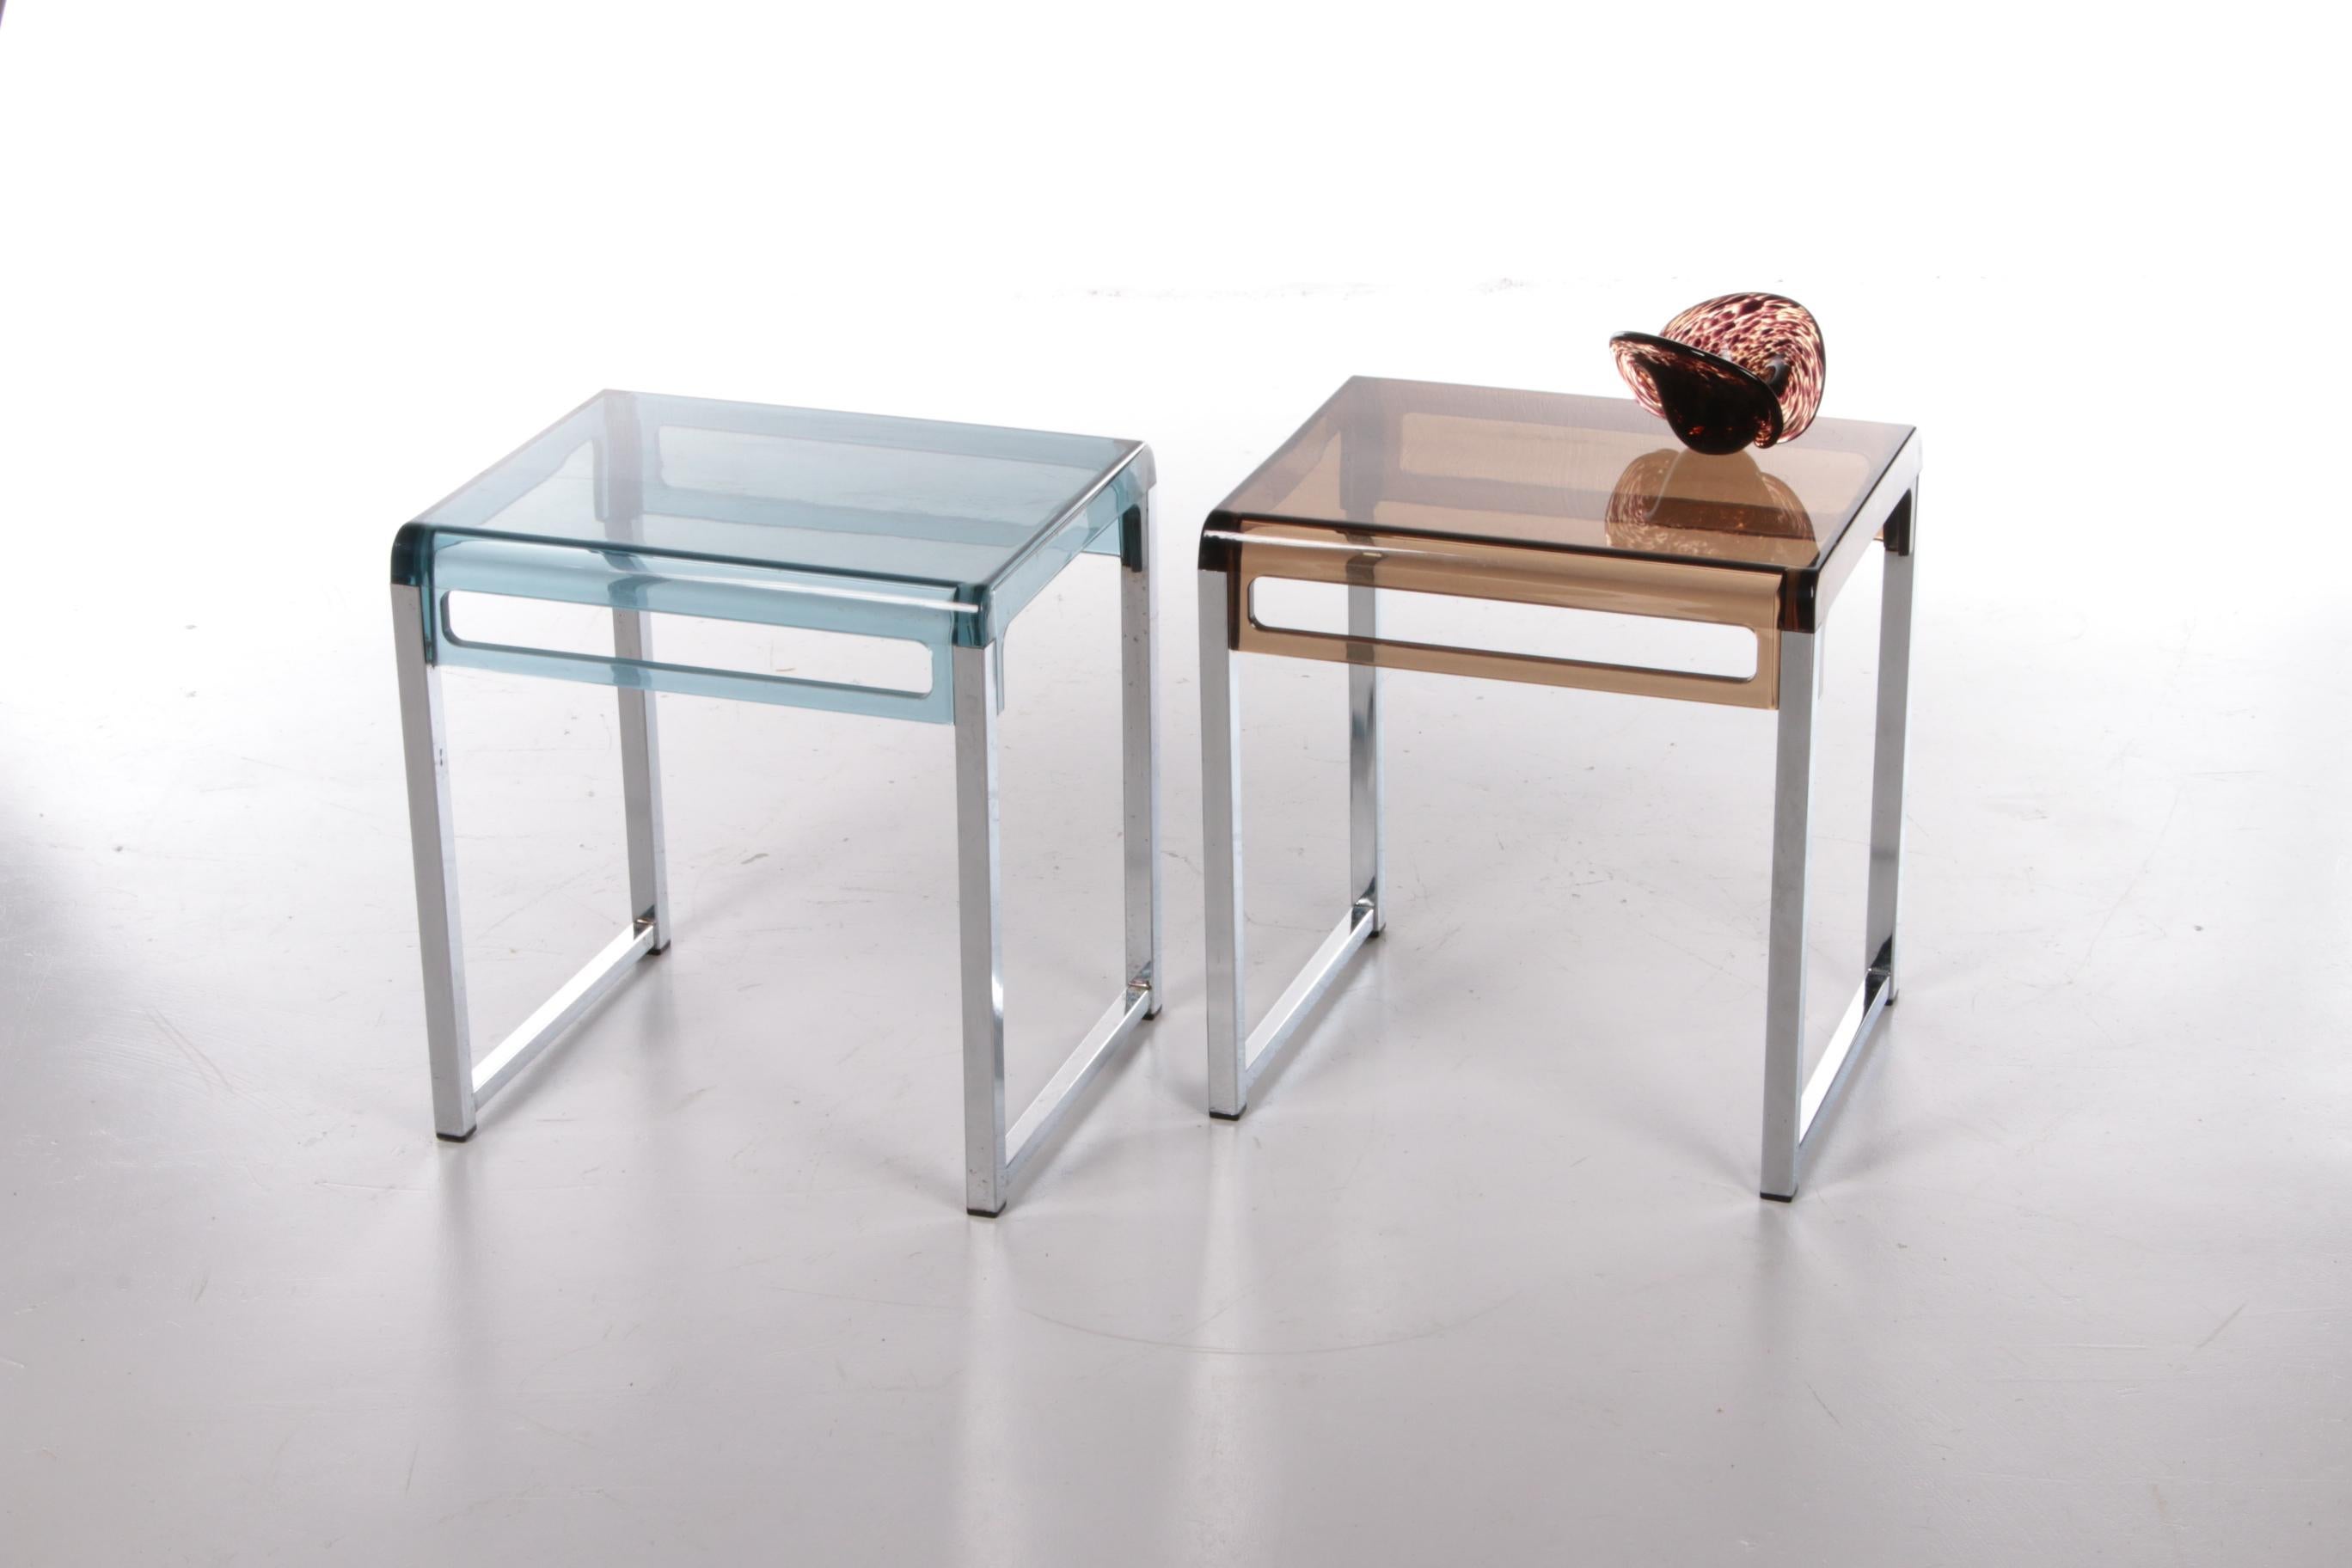 Vintage Plexiglass Side Tables Marc Berthier - Set of 2, 1960s

Discover the charm of the 60s with this unique set of vintage side tables, designed by Marc Berthier. These stylish tables are made of a sturdy metal base combined with a high-quality